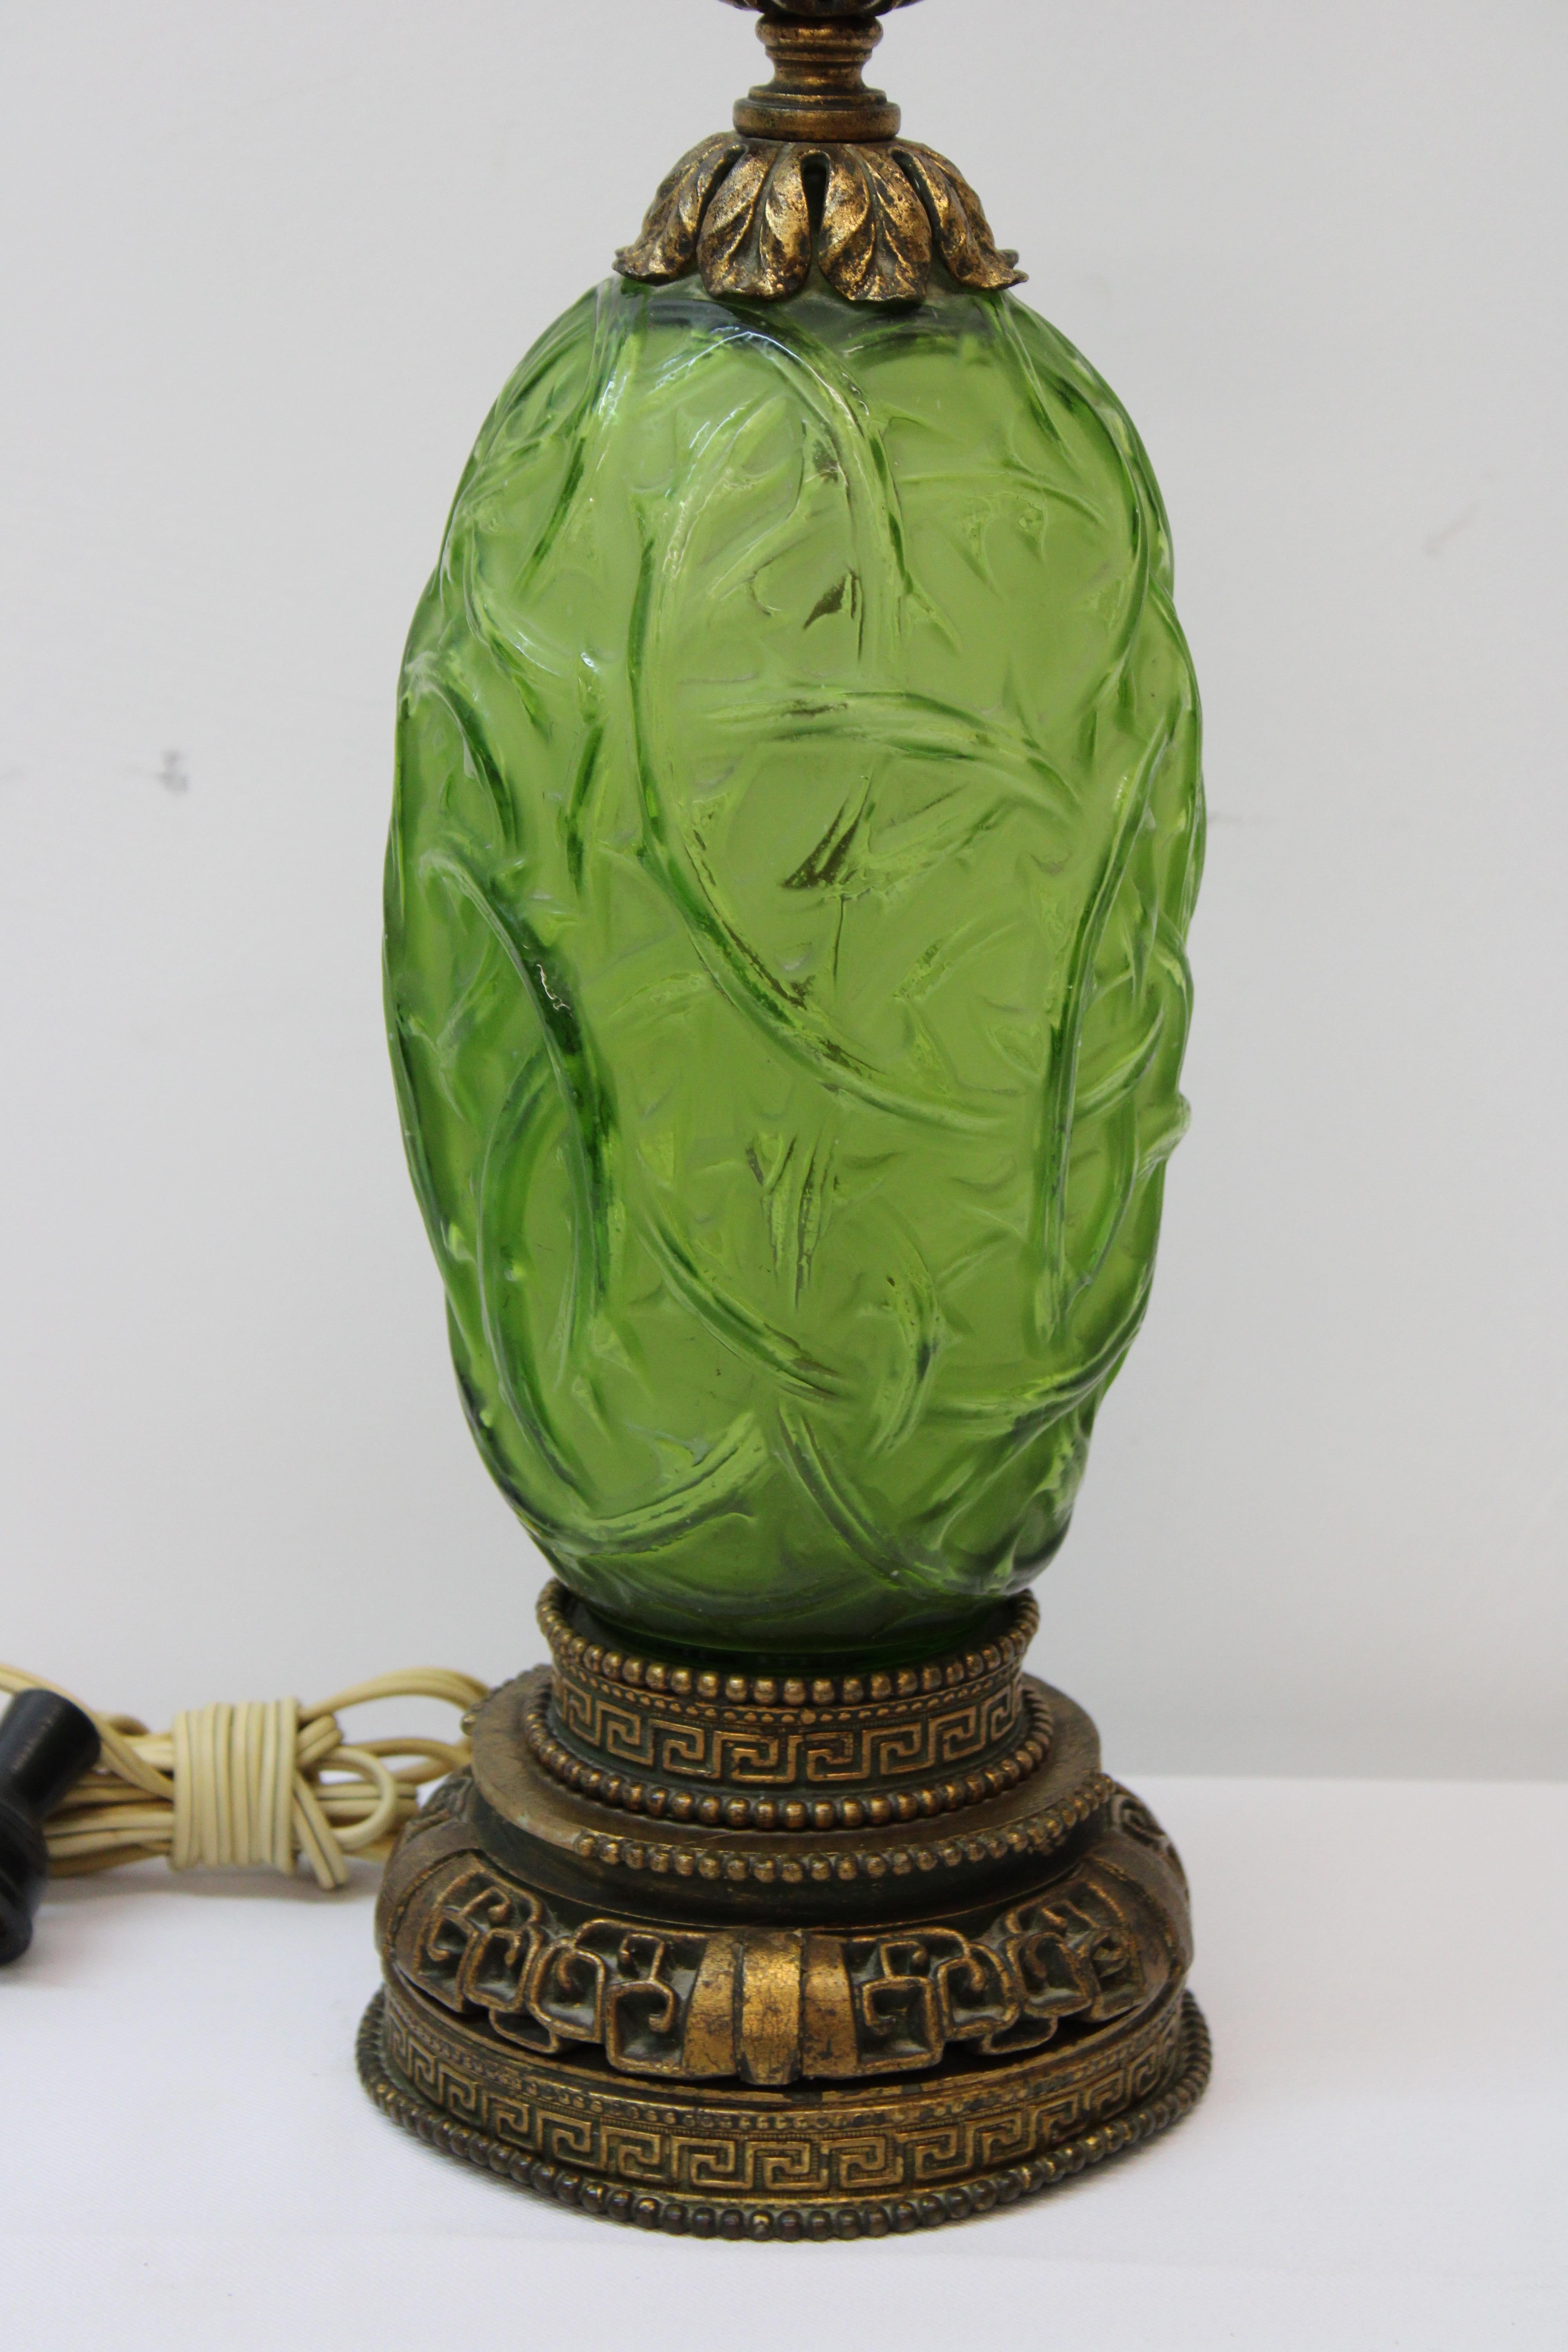 C. 20th century

Art Nouveau style hand blown green glass & brass table lamp

Lamp is missing ( pull string for one of the sides of turning light on ).